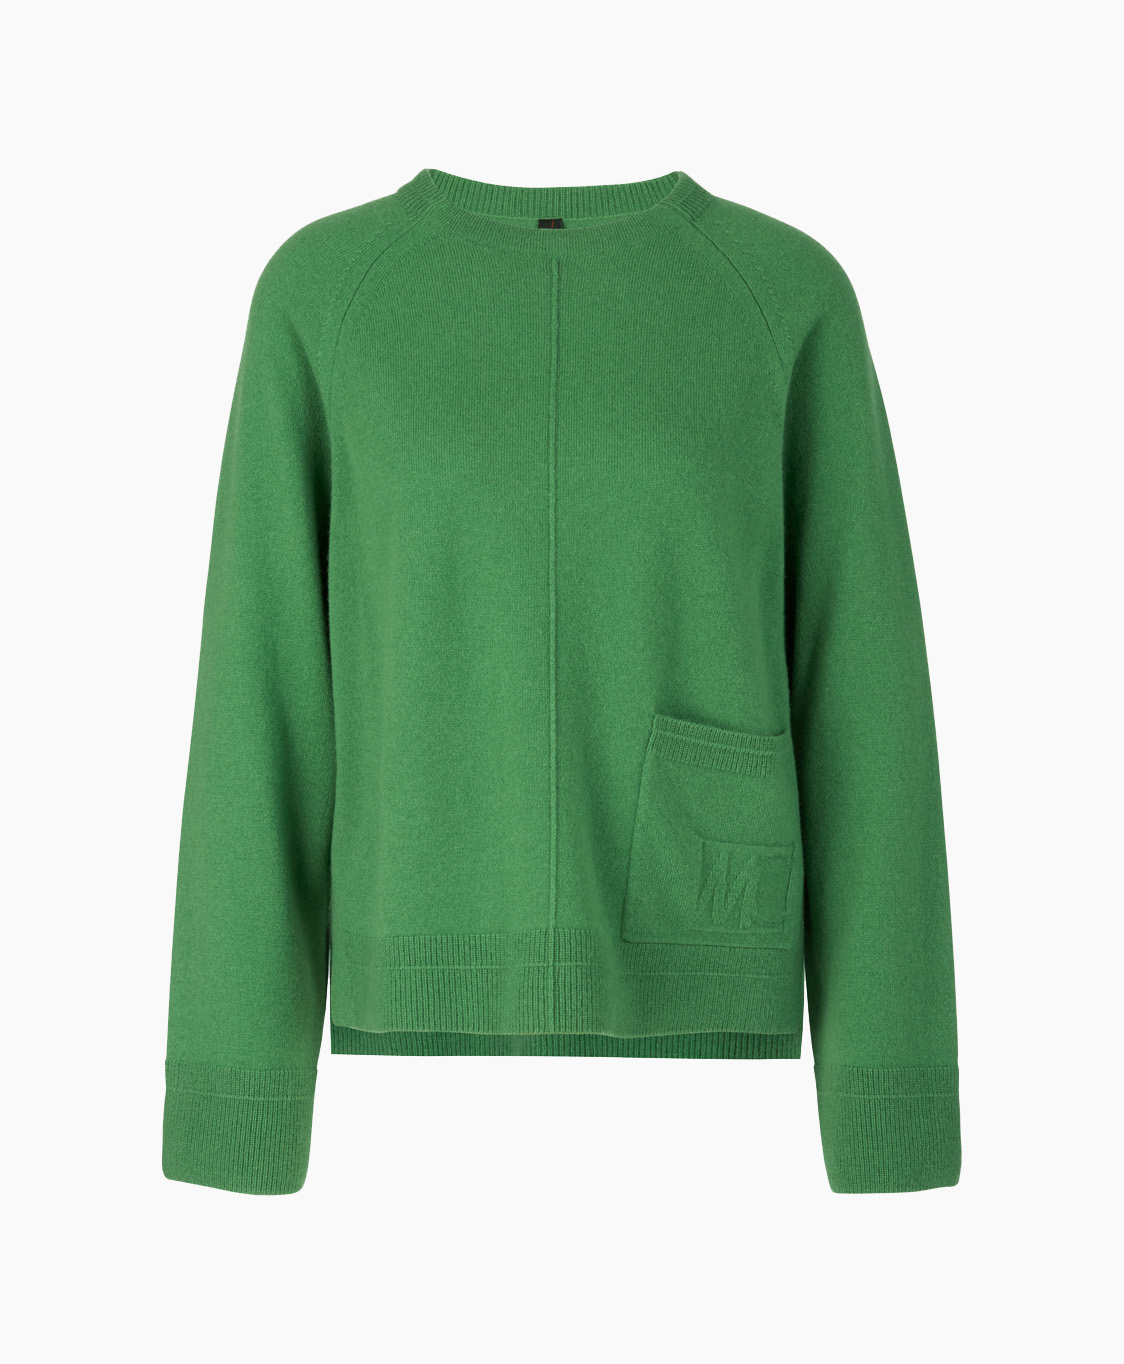 Marccain Collectie Pullover Uc 41.01 M51 Groen